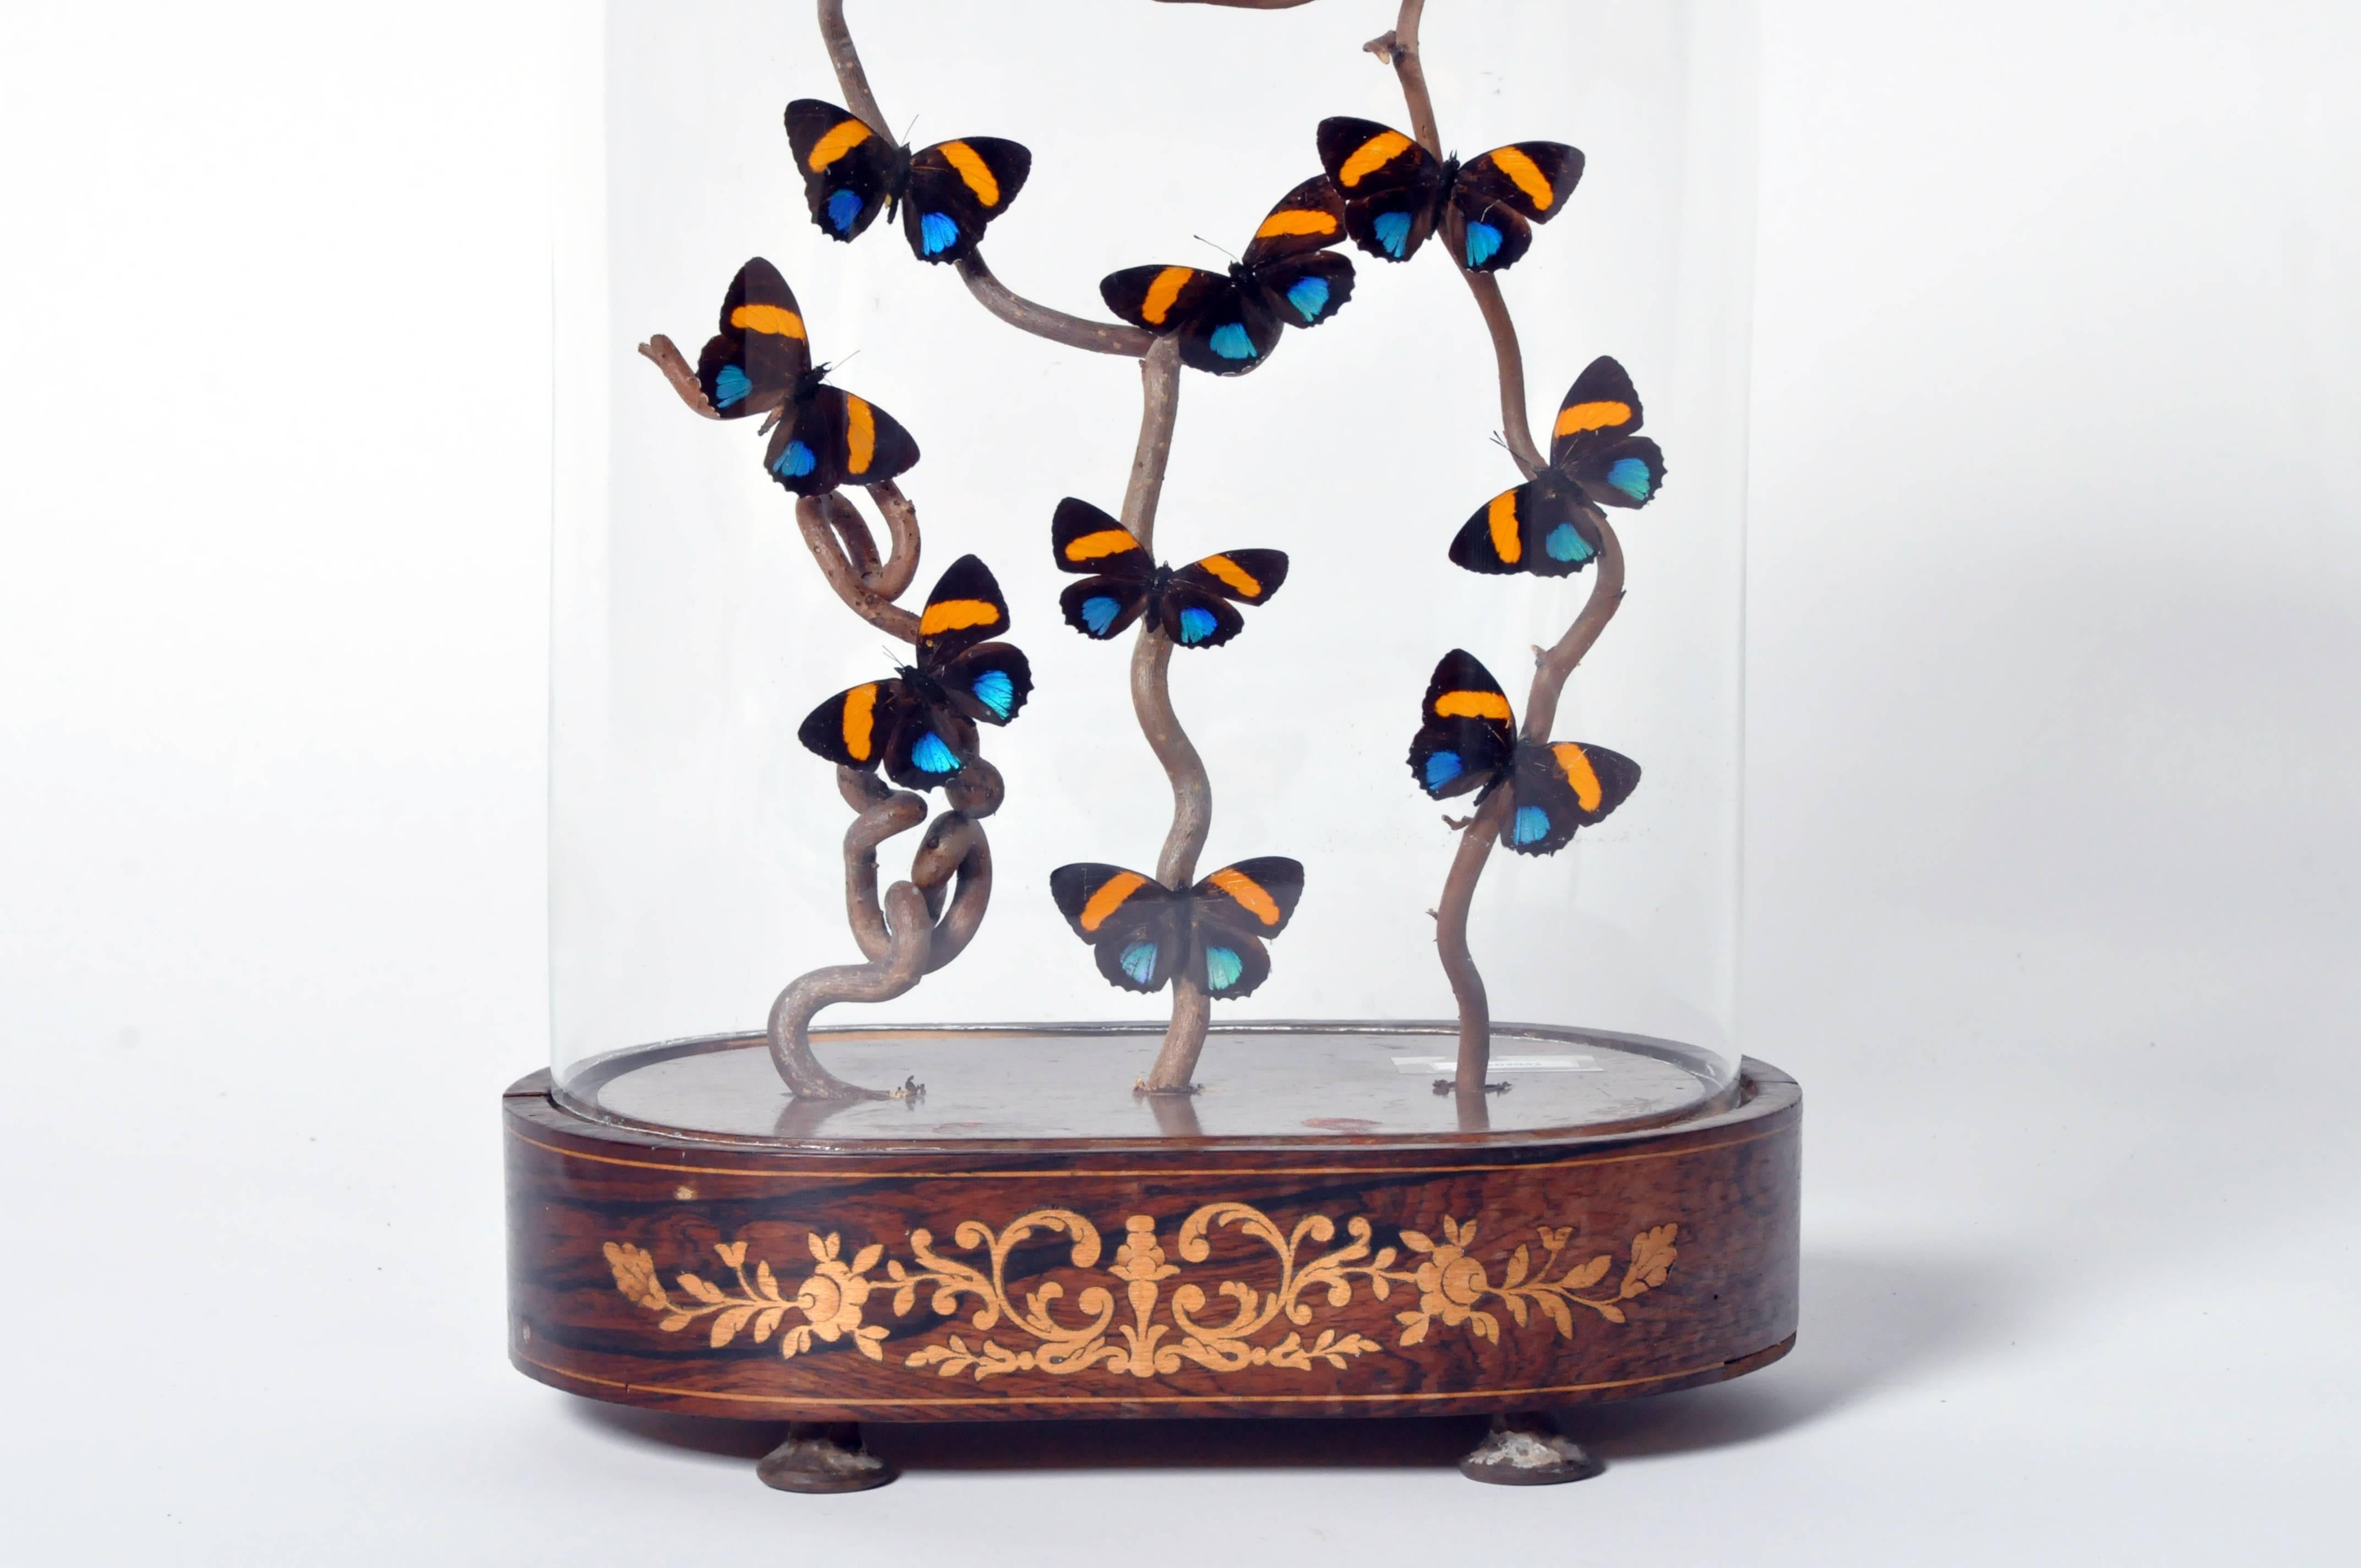 20th Century Decorative Cloche with Butterfly Display